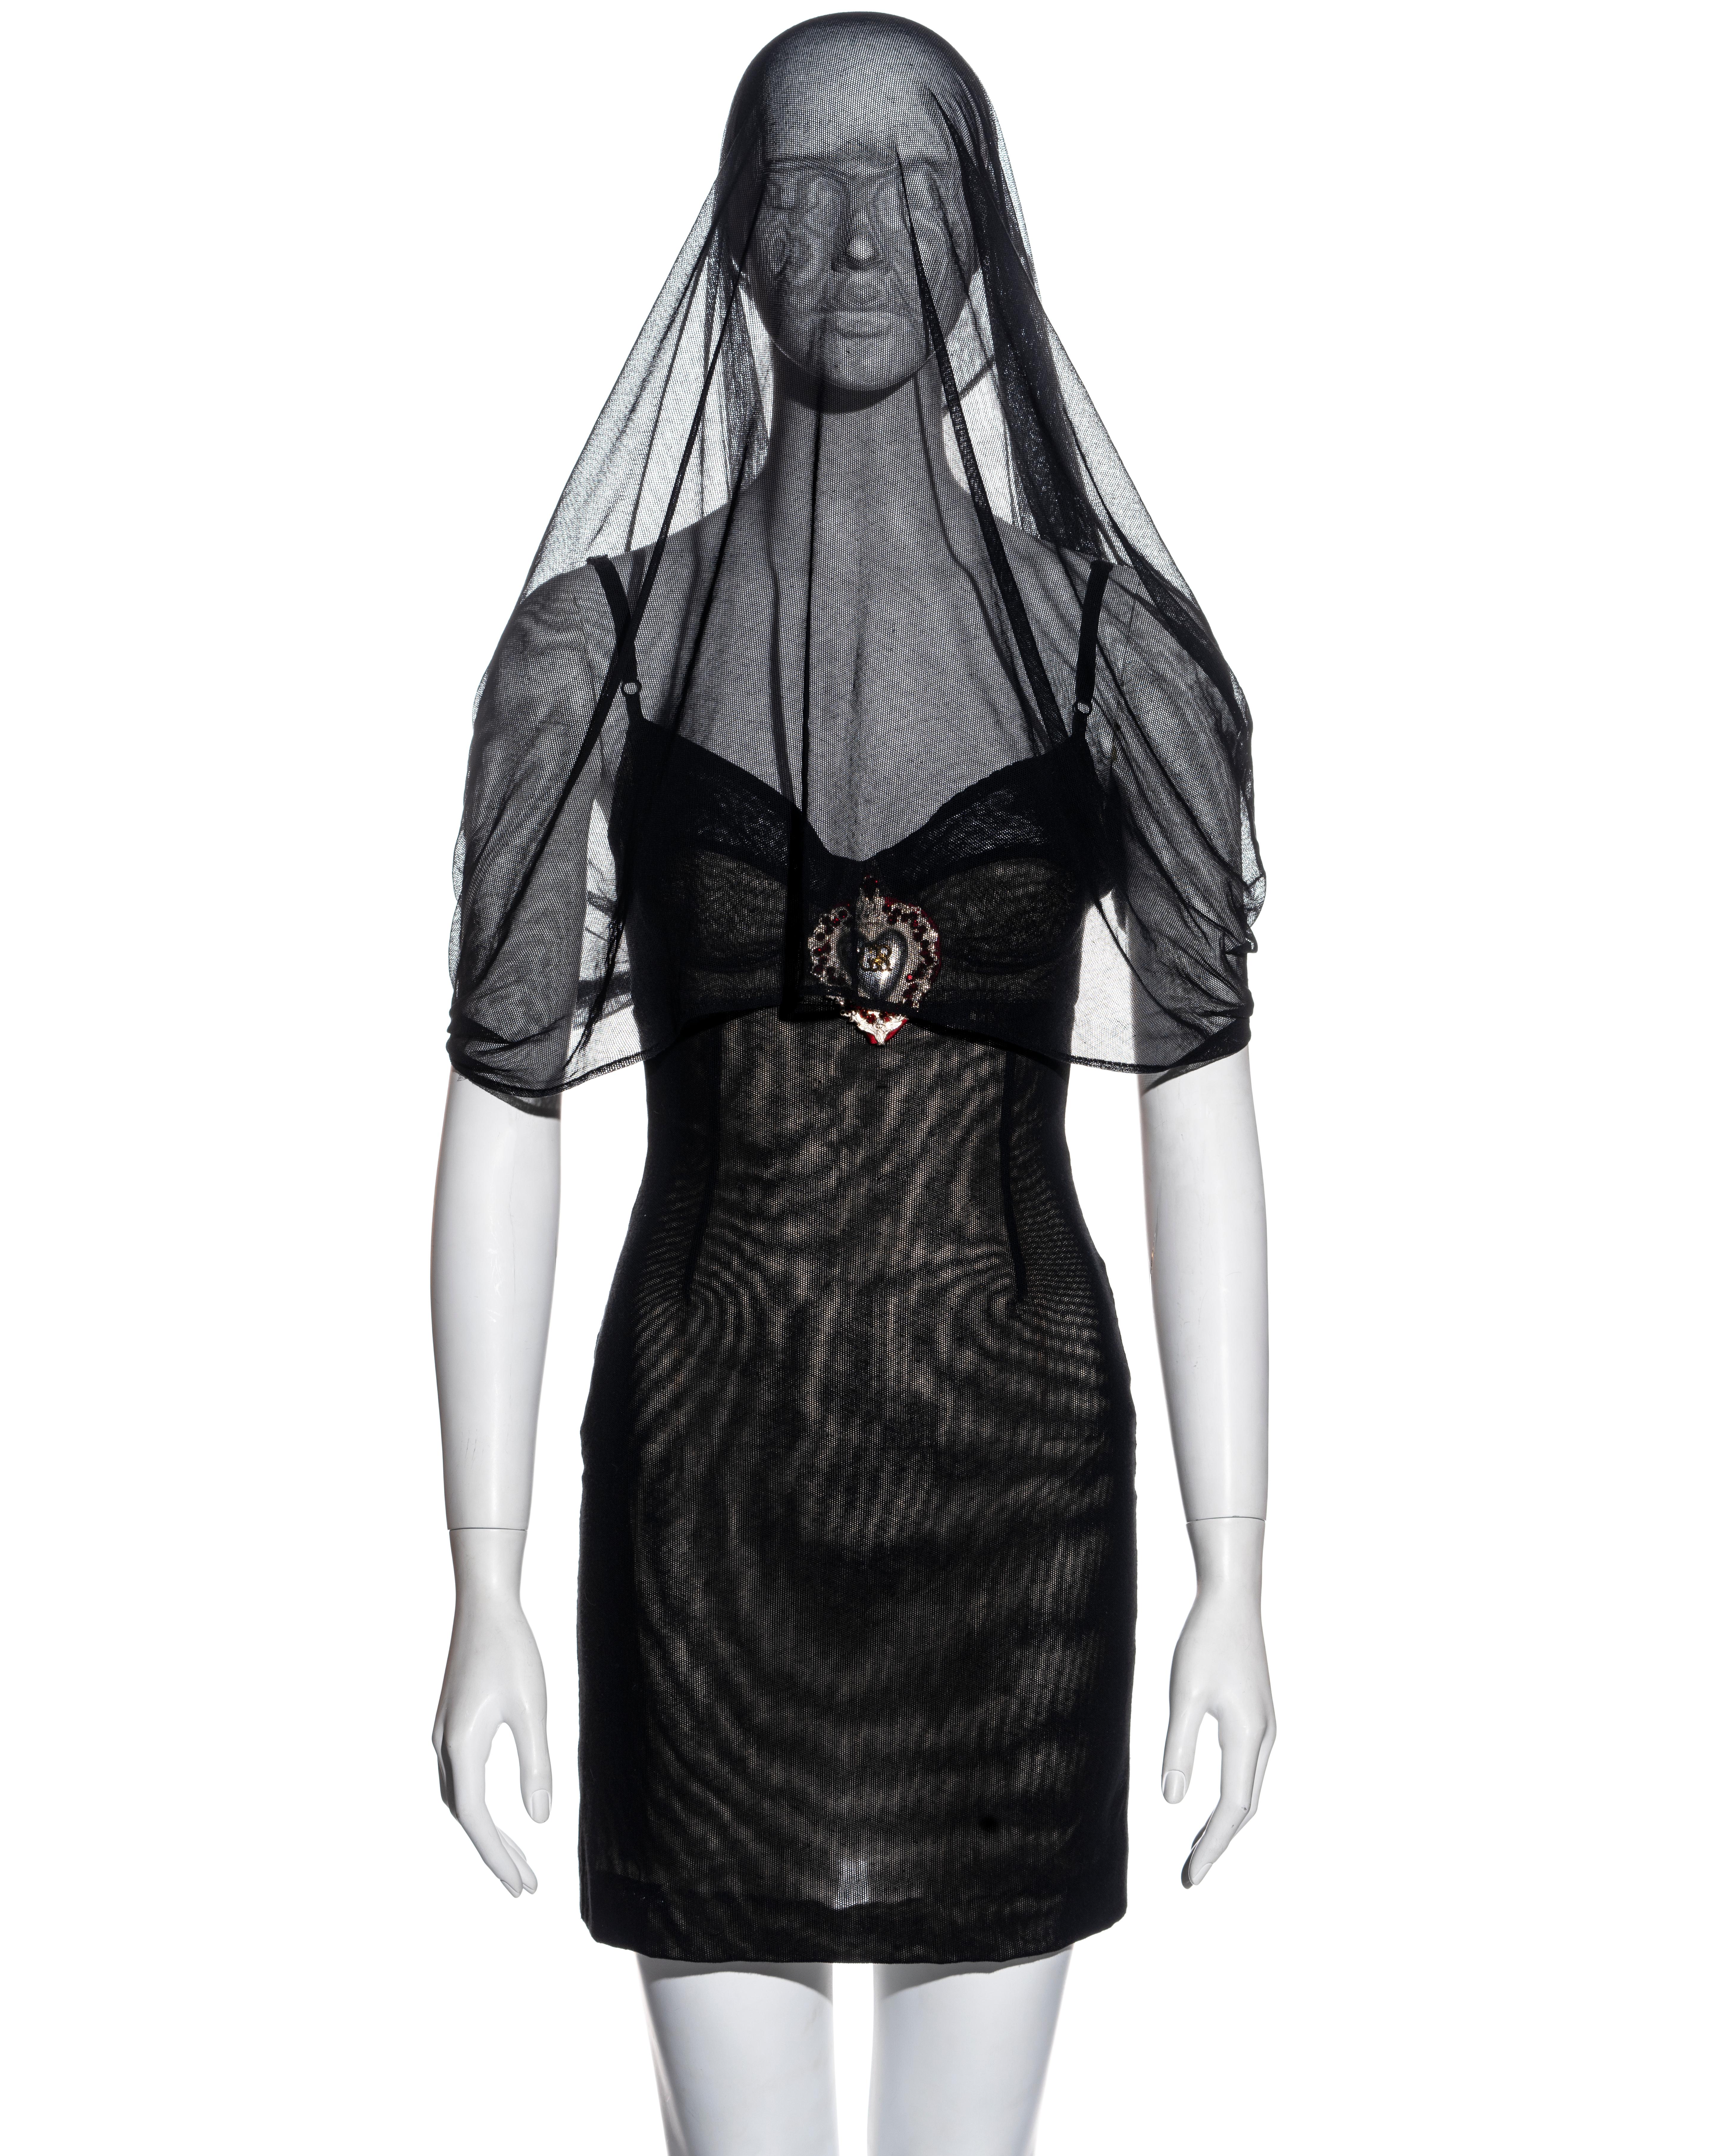 ▪ An important Dolce & Gabbana veiled mini dress
▪ Black double-layer stretch cotton tulle
▪ Attached veil; can be worn in many ways 
▪ Corset hooks at back opening
▪ Built-in bra 
▪ Large heart-shaped pendant with red crystals
▪ IT 42 - FR 38 - UK